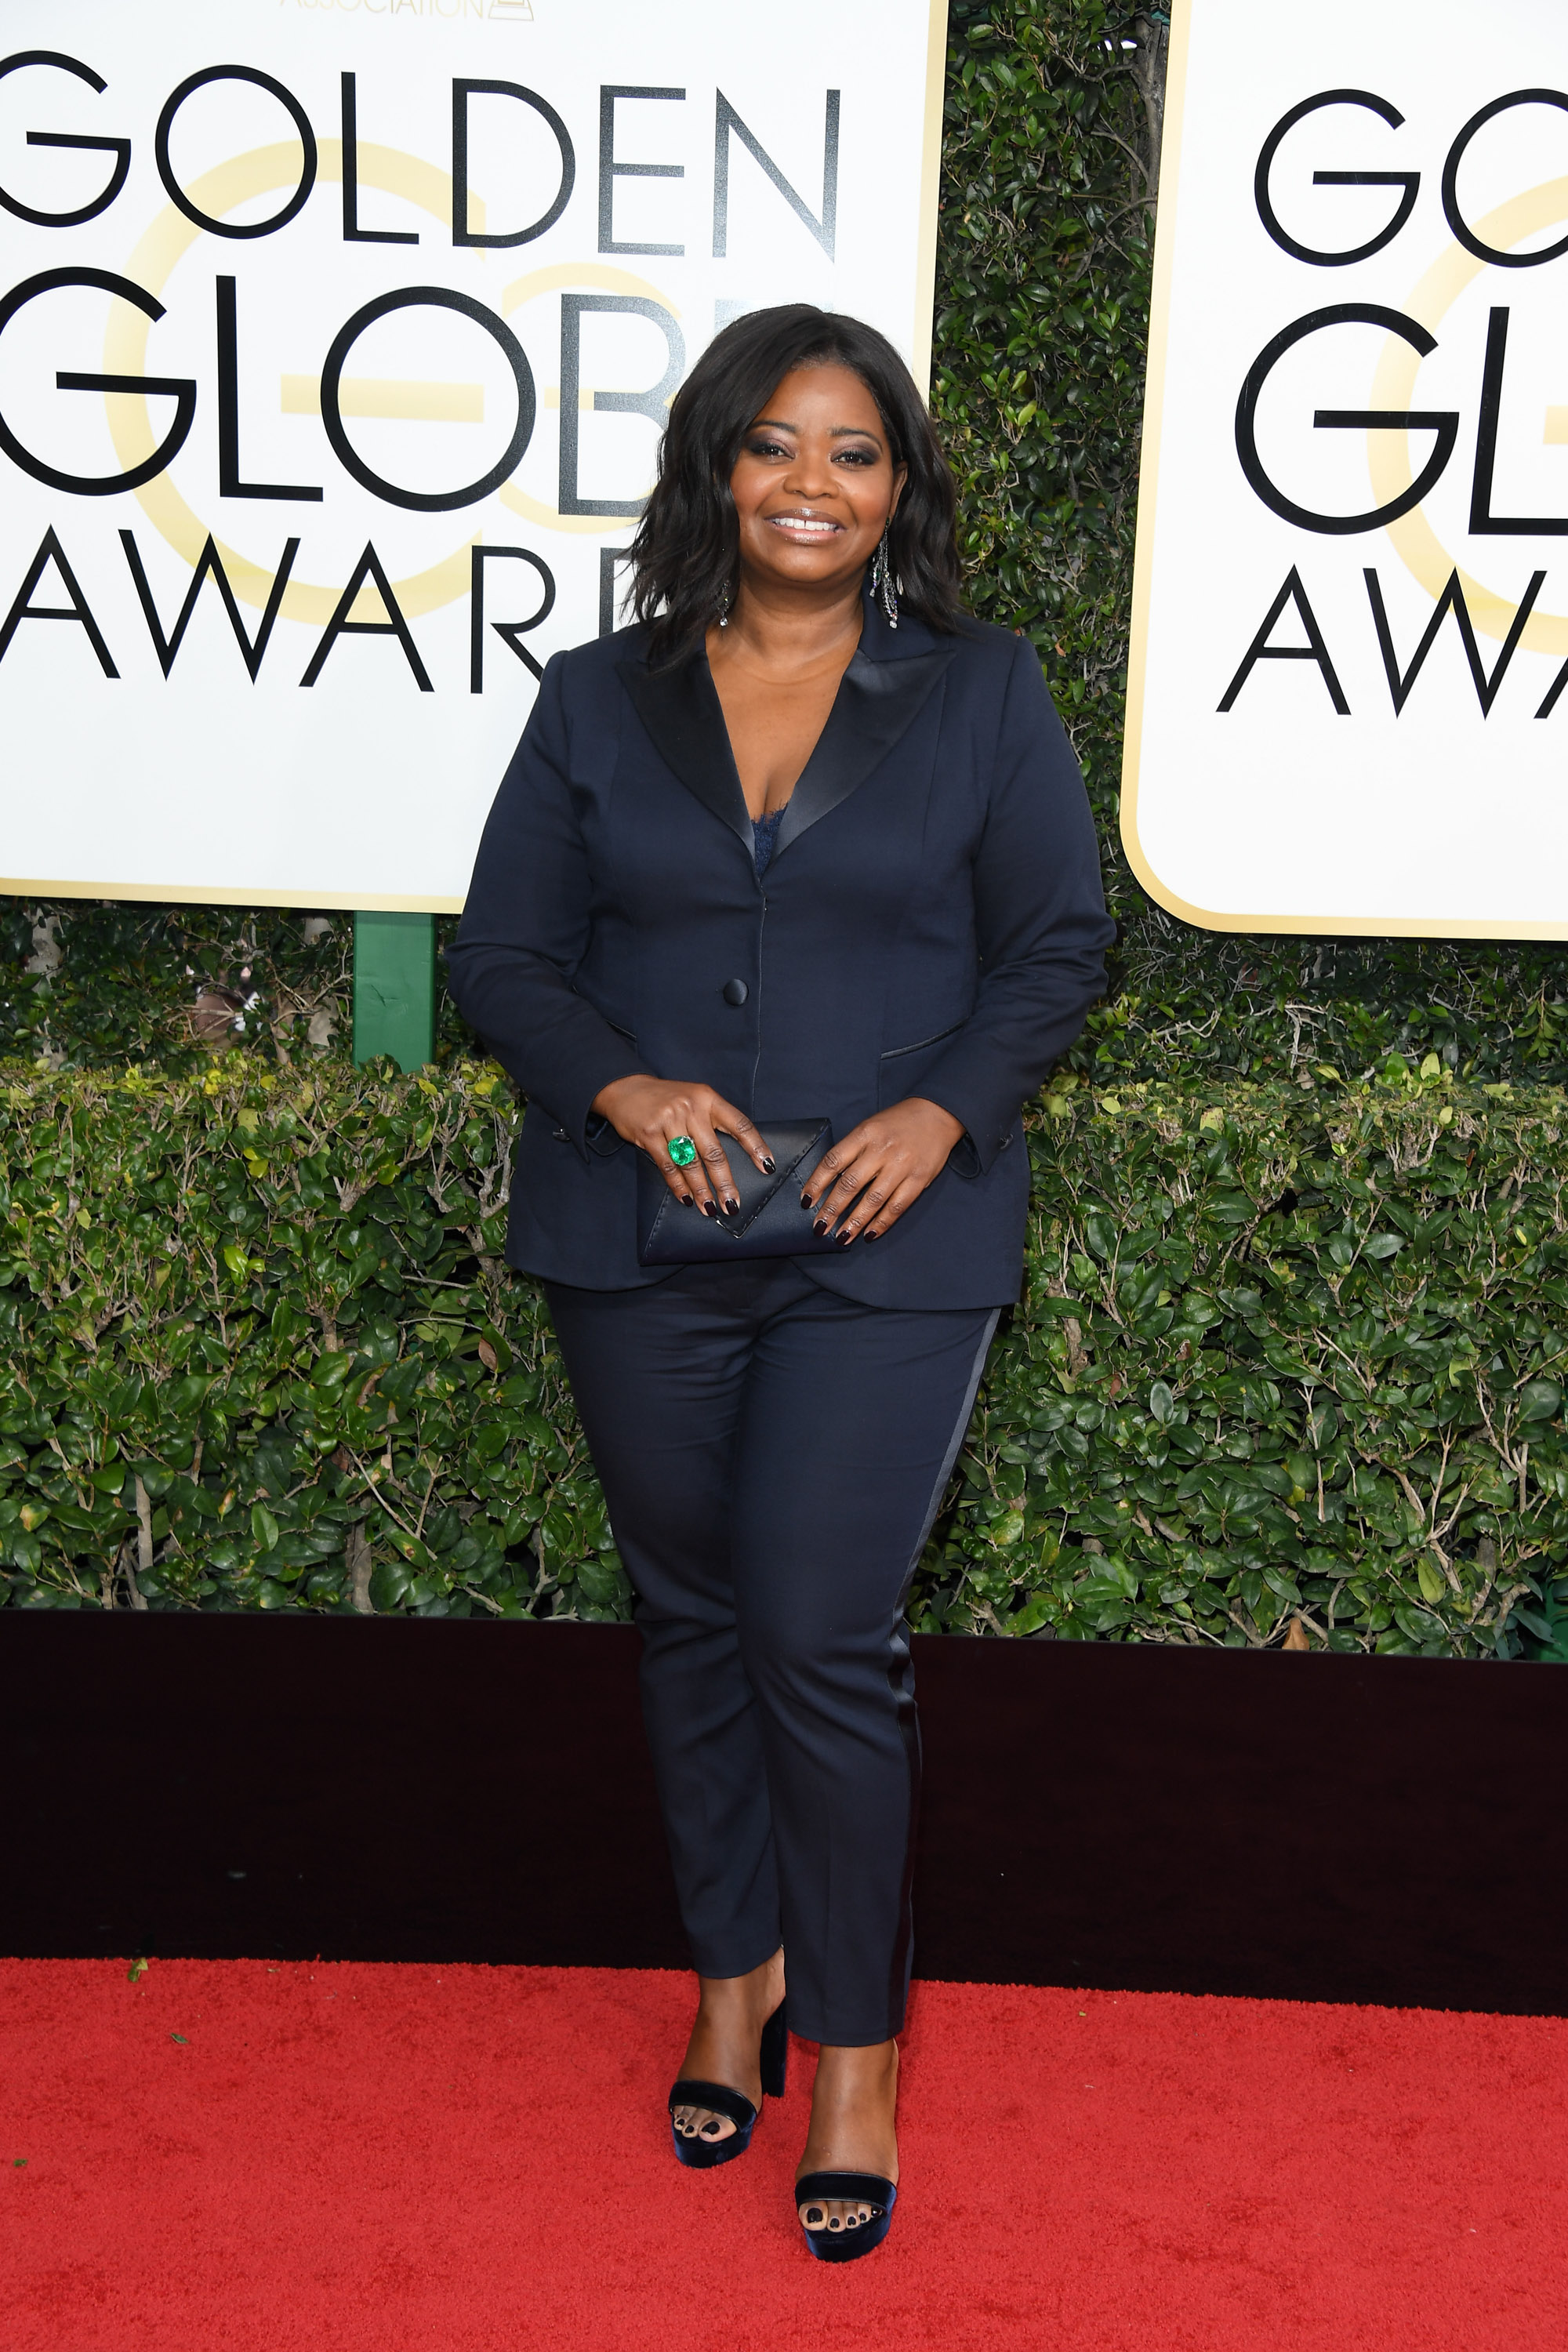 BEVERLY HILLS, CA - JANUARY 08: Actress Octavia Spencer attends the 74th Annual Golden Globe Awards held at The Beverly Hilton Hotel on January 8, 2017 in Beverly Hills, California. (Photo by George Pimentel/WireImage) (George Pimentel—WireImage)